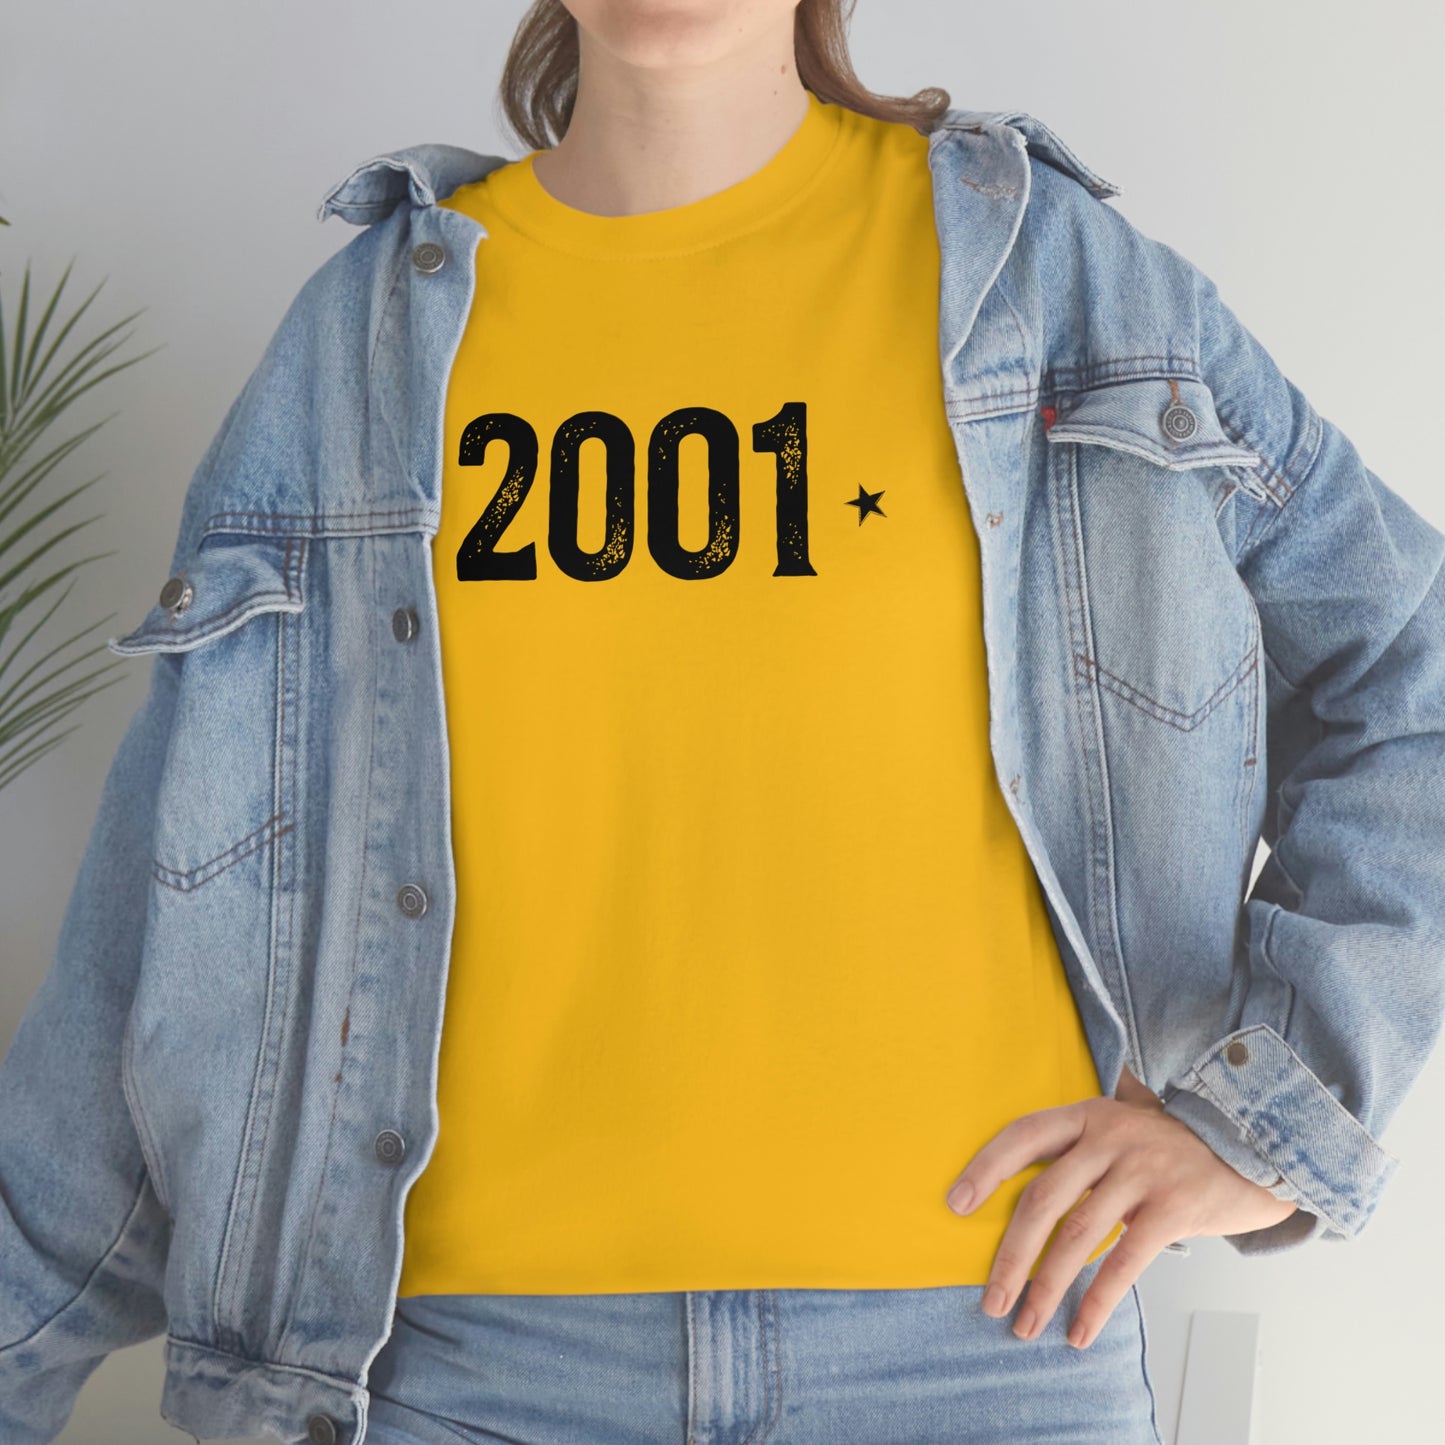 "2001 Year" T-Shirt - Weave Got Gifts - Unique Gifts You Won’t Find Anywhere Else!